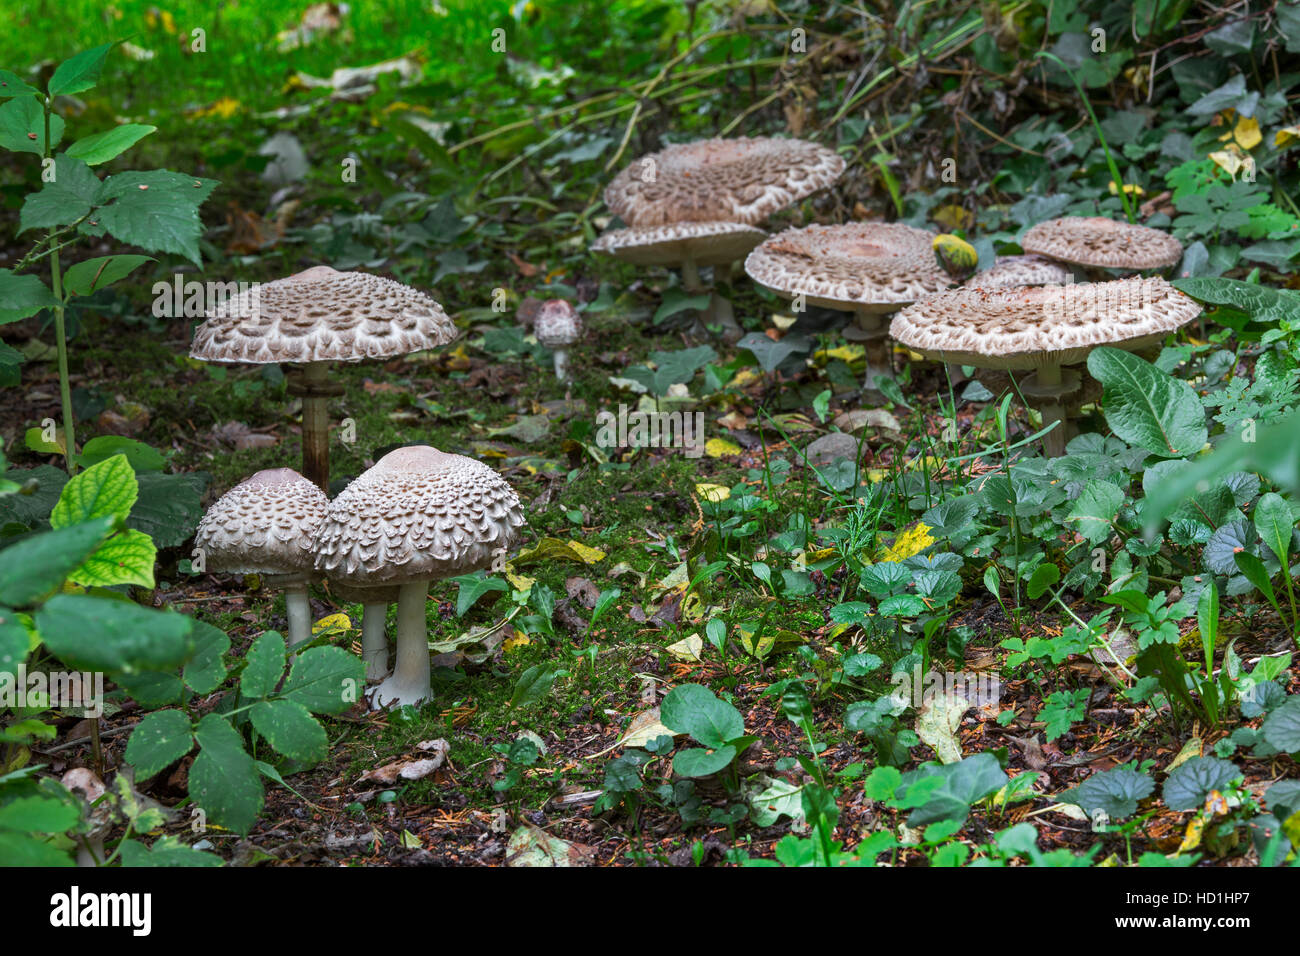 Parasol mushrooms (Macrolepiota procera / Lepiota procera) in different growth stages in forest Stock Photo